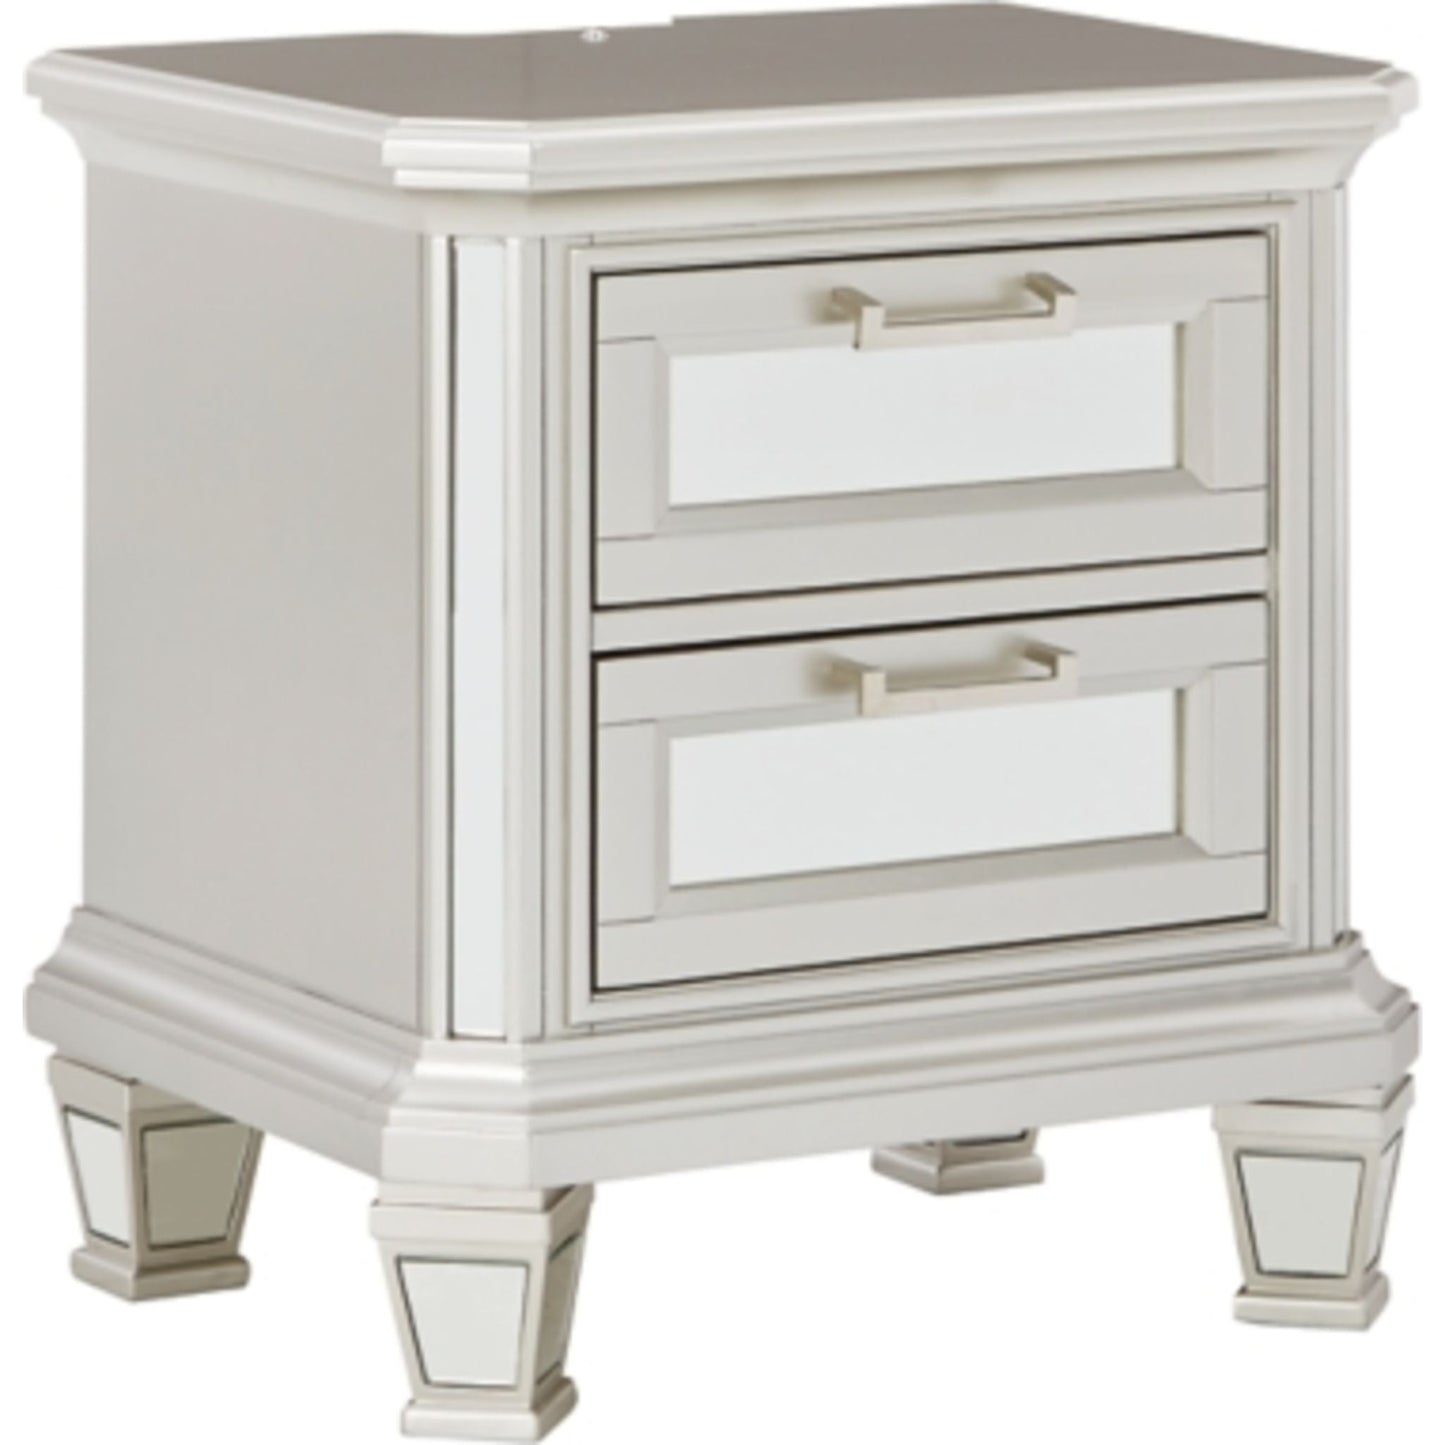 Lindenfield Nightstand - Silver